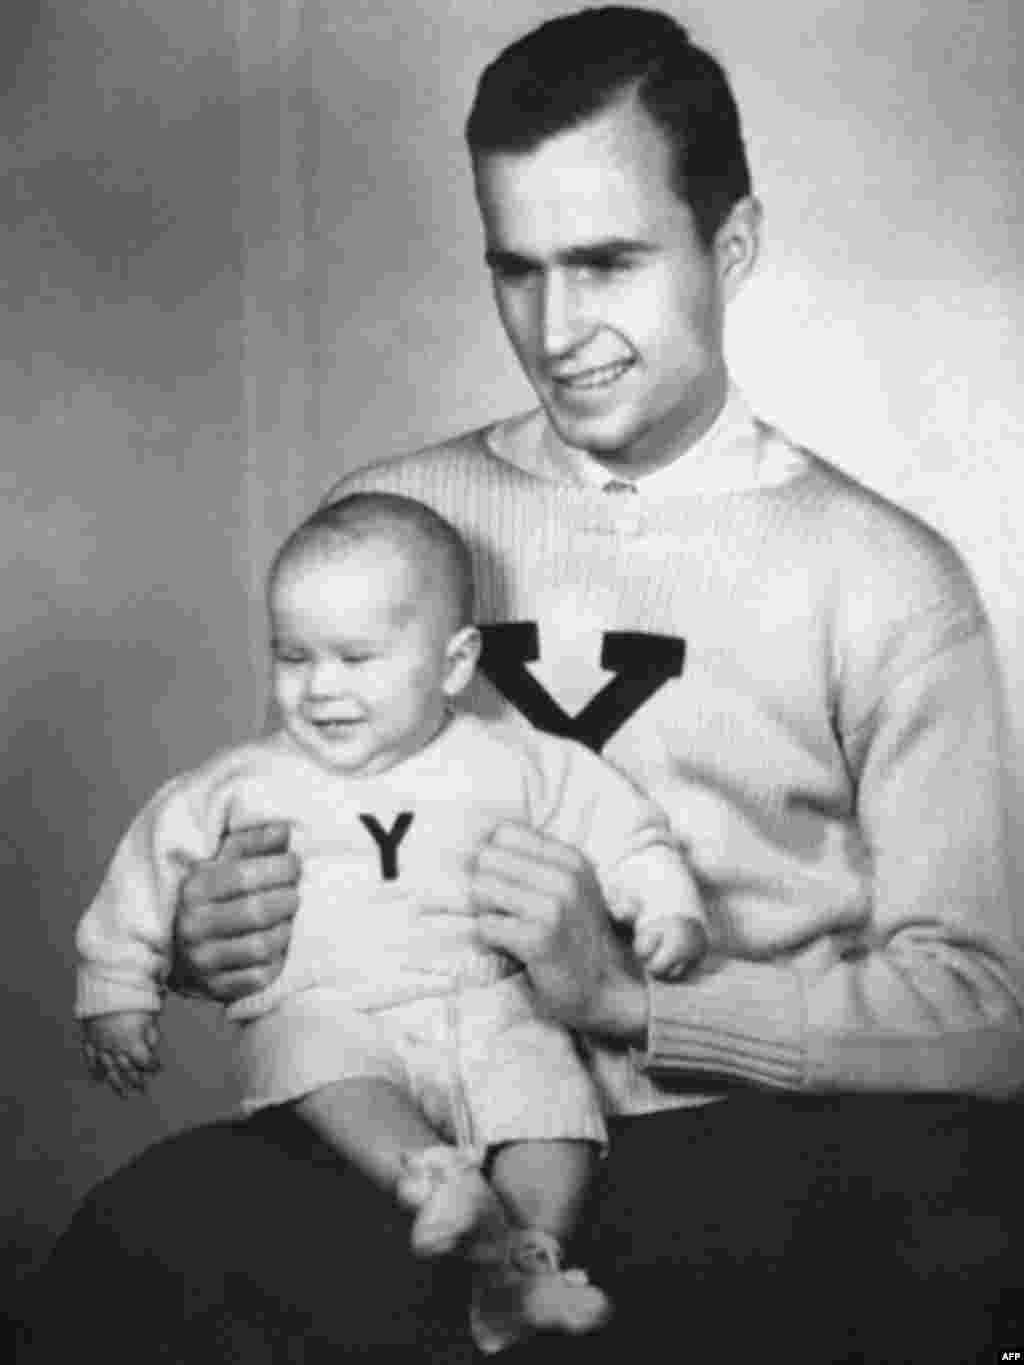 Future presidents, father and son - Future U.S. Presidents George Bush (right) and George W. Bush wearing matching Yale University jerseys in New Haven, Connecticut in 1946.